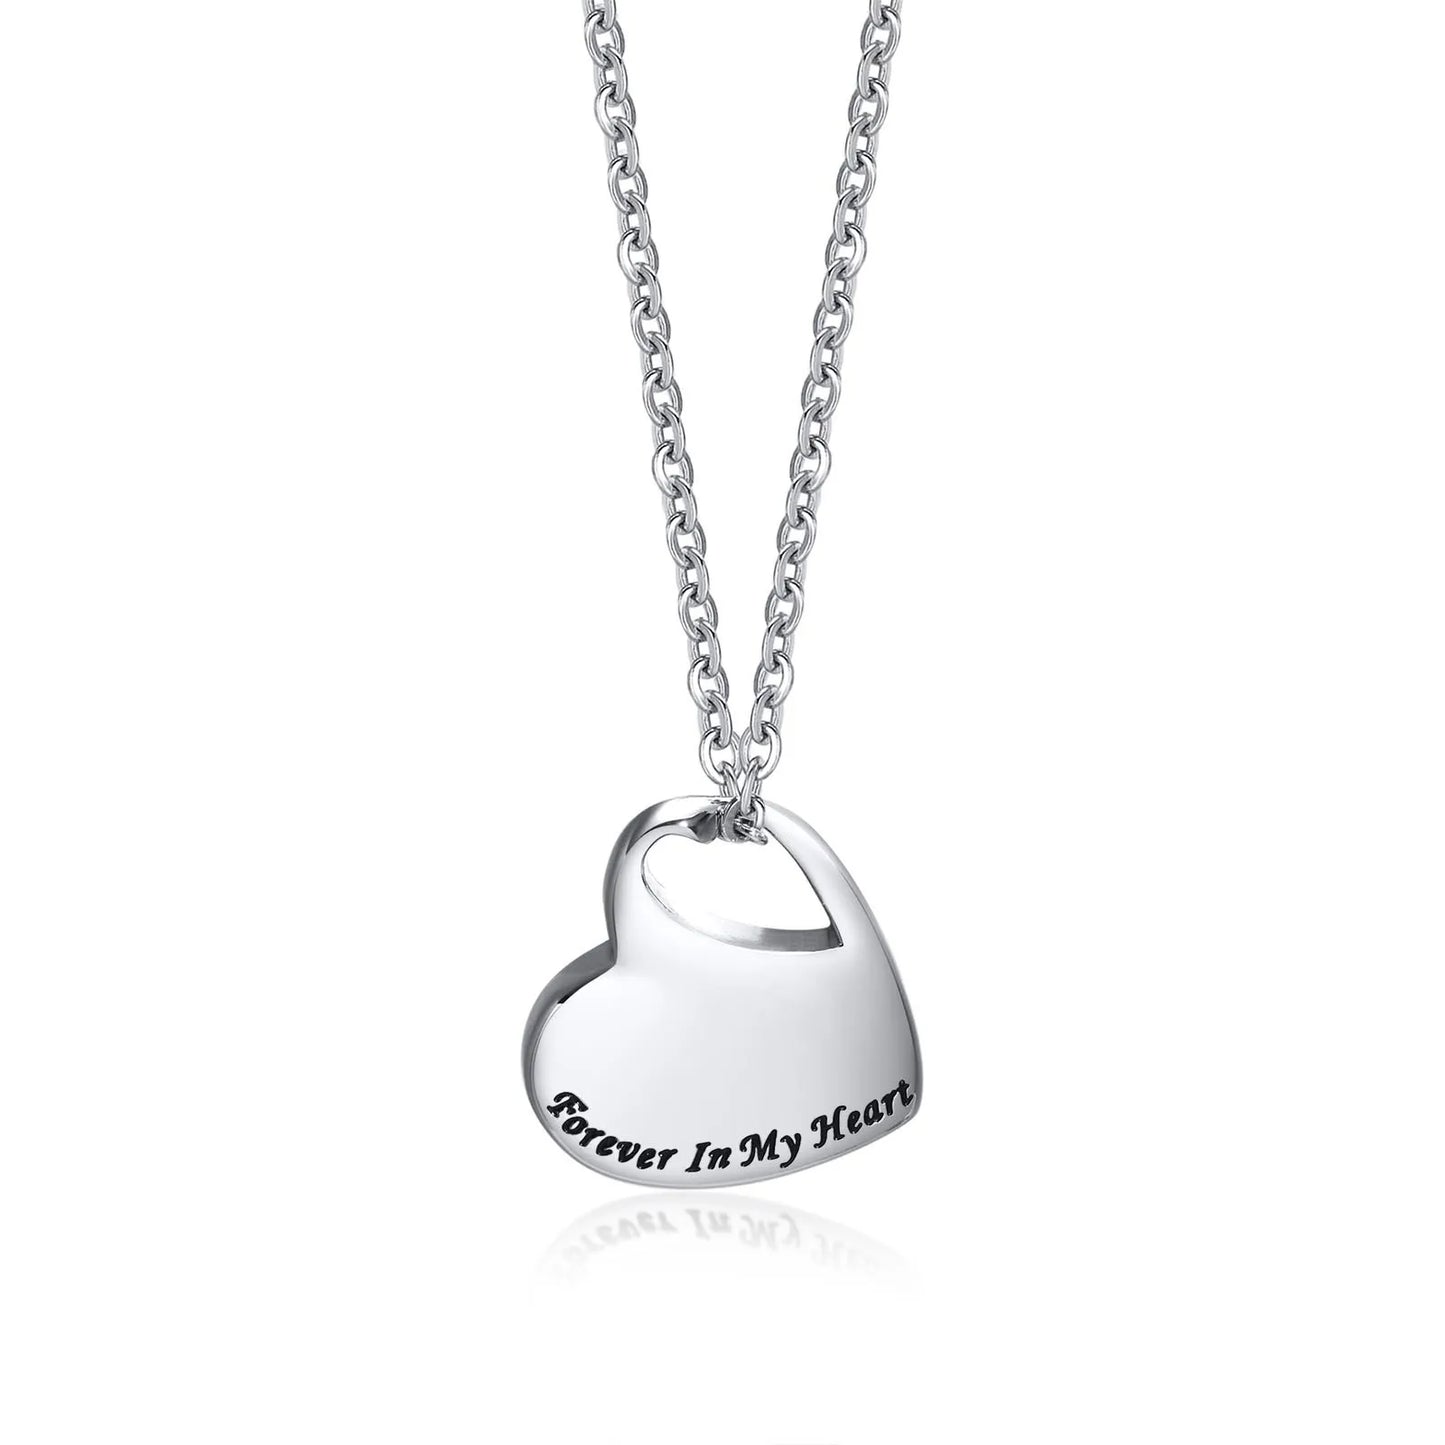 Forever In My Heart Cremation Jewelry For Ashes Keepsake Pendant Necklace